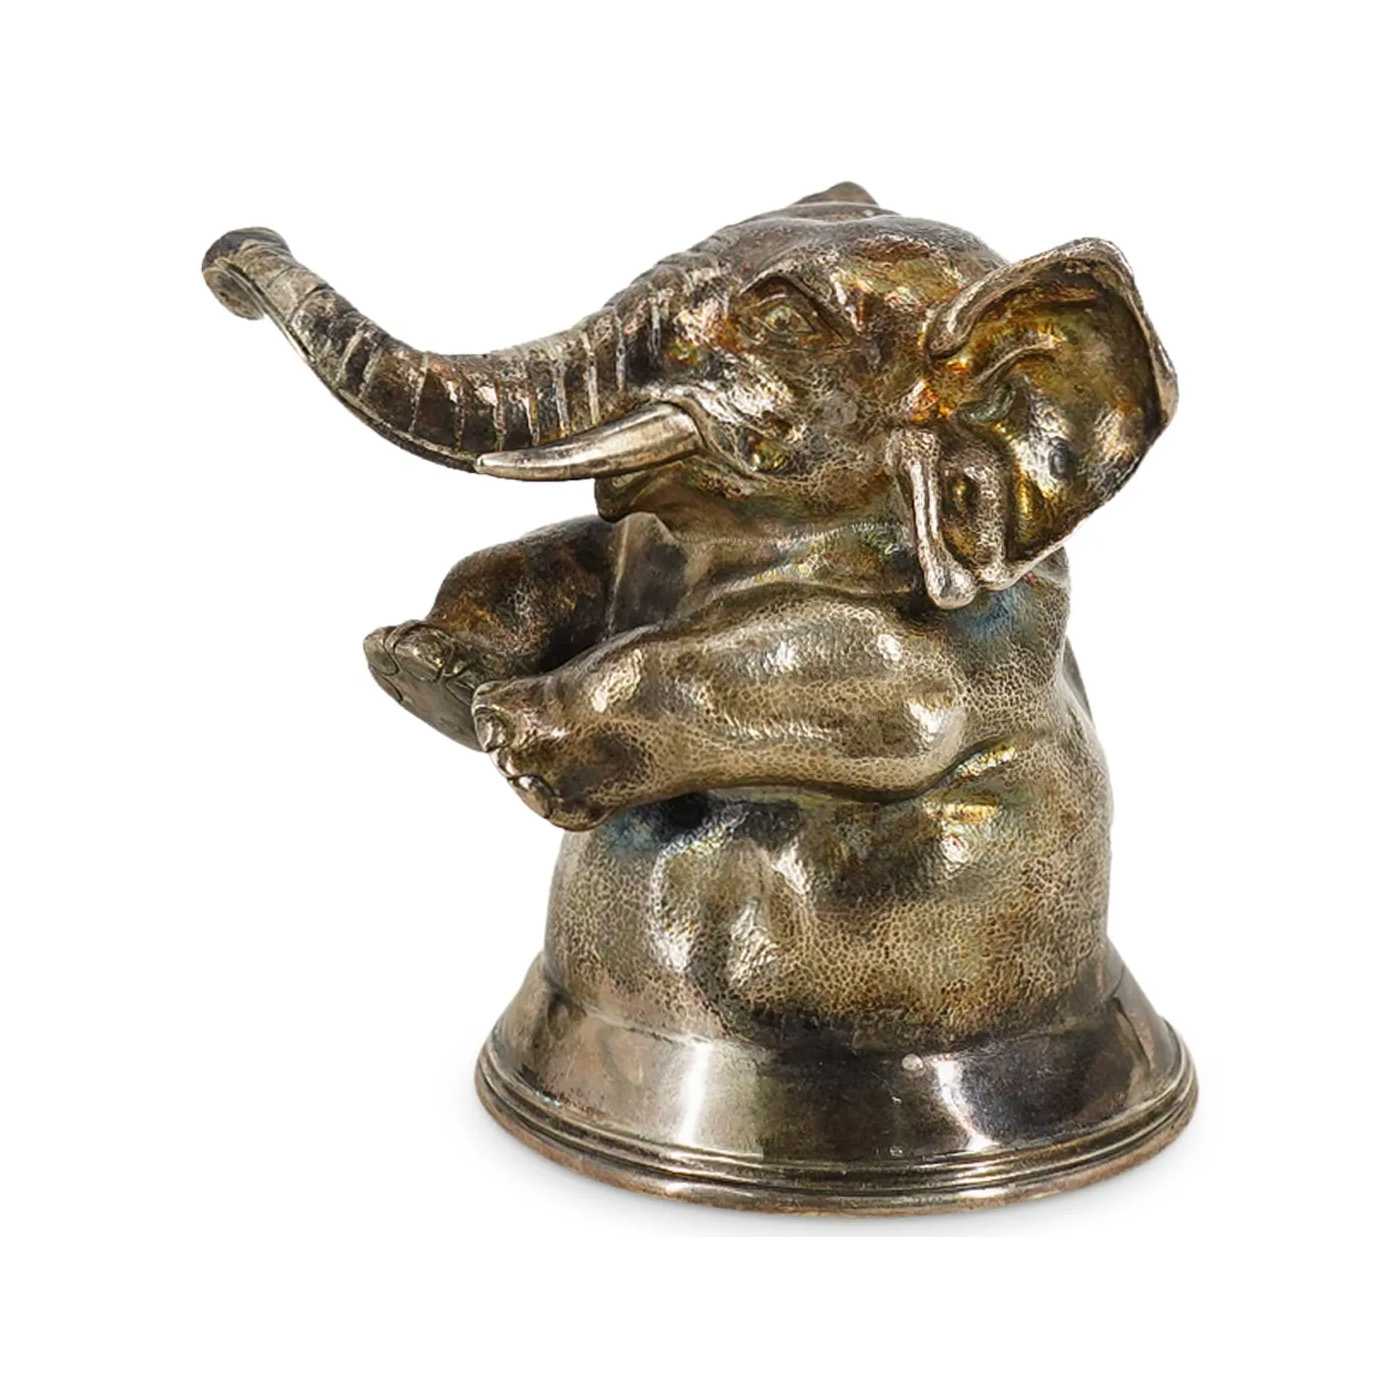 Russian 875 Silver Elephant Stirrup Cup, estimated at $1,000-$3,000 at Akiba.